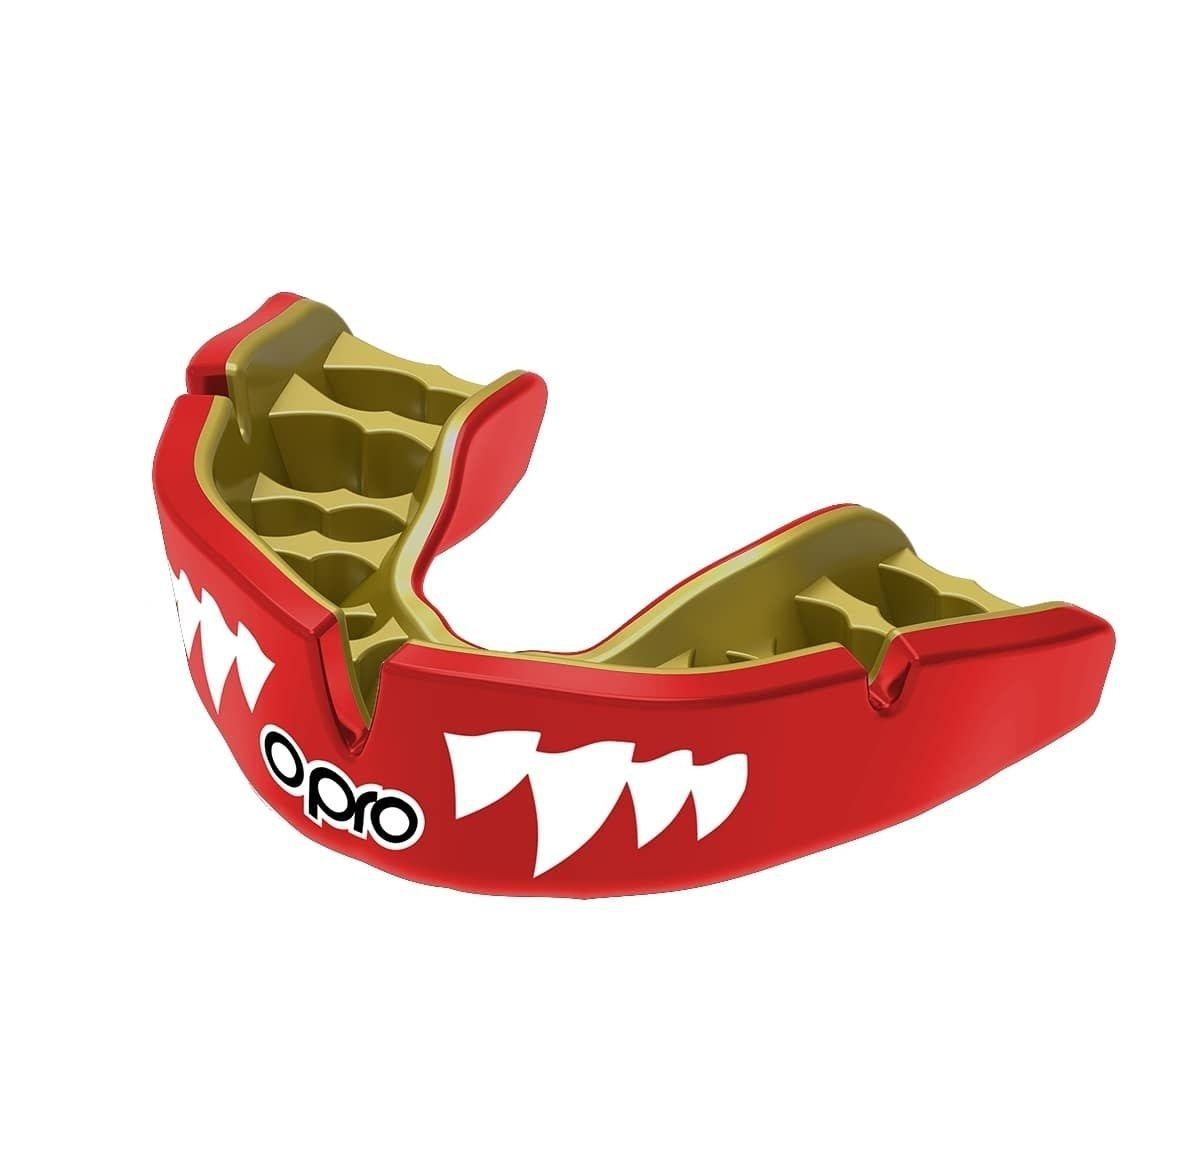 OPRO  OPRO Instant Custom Jaws - Red/White/Gold 